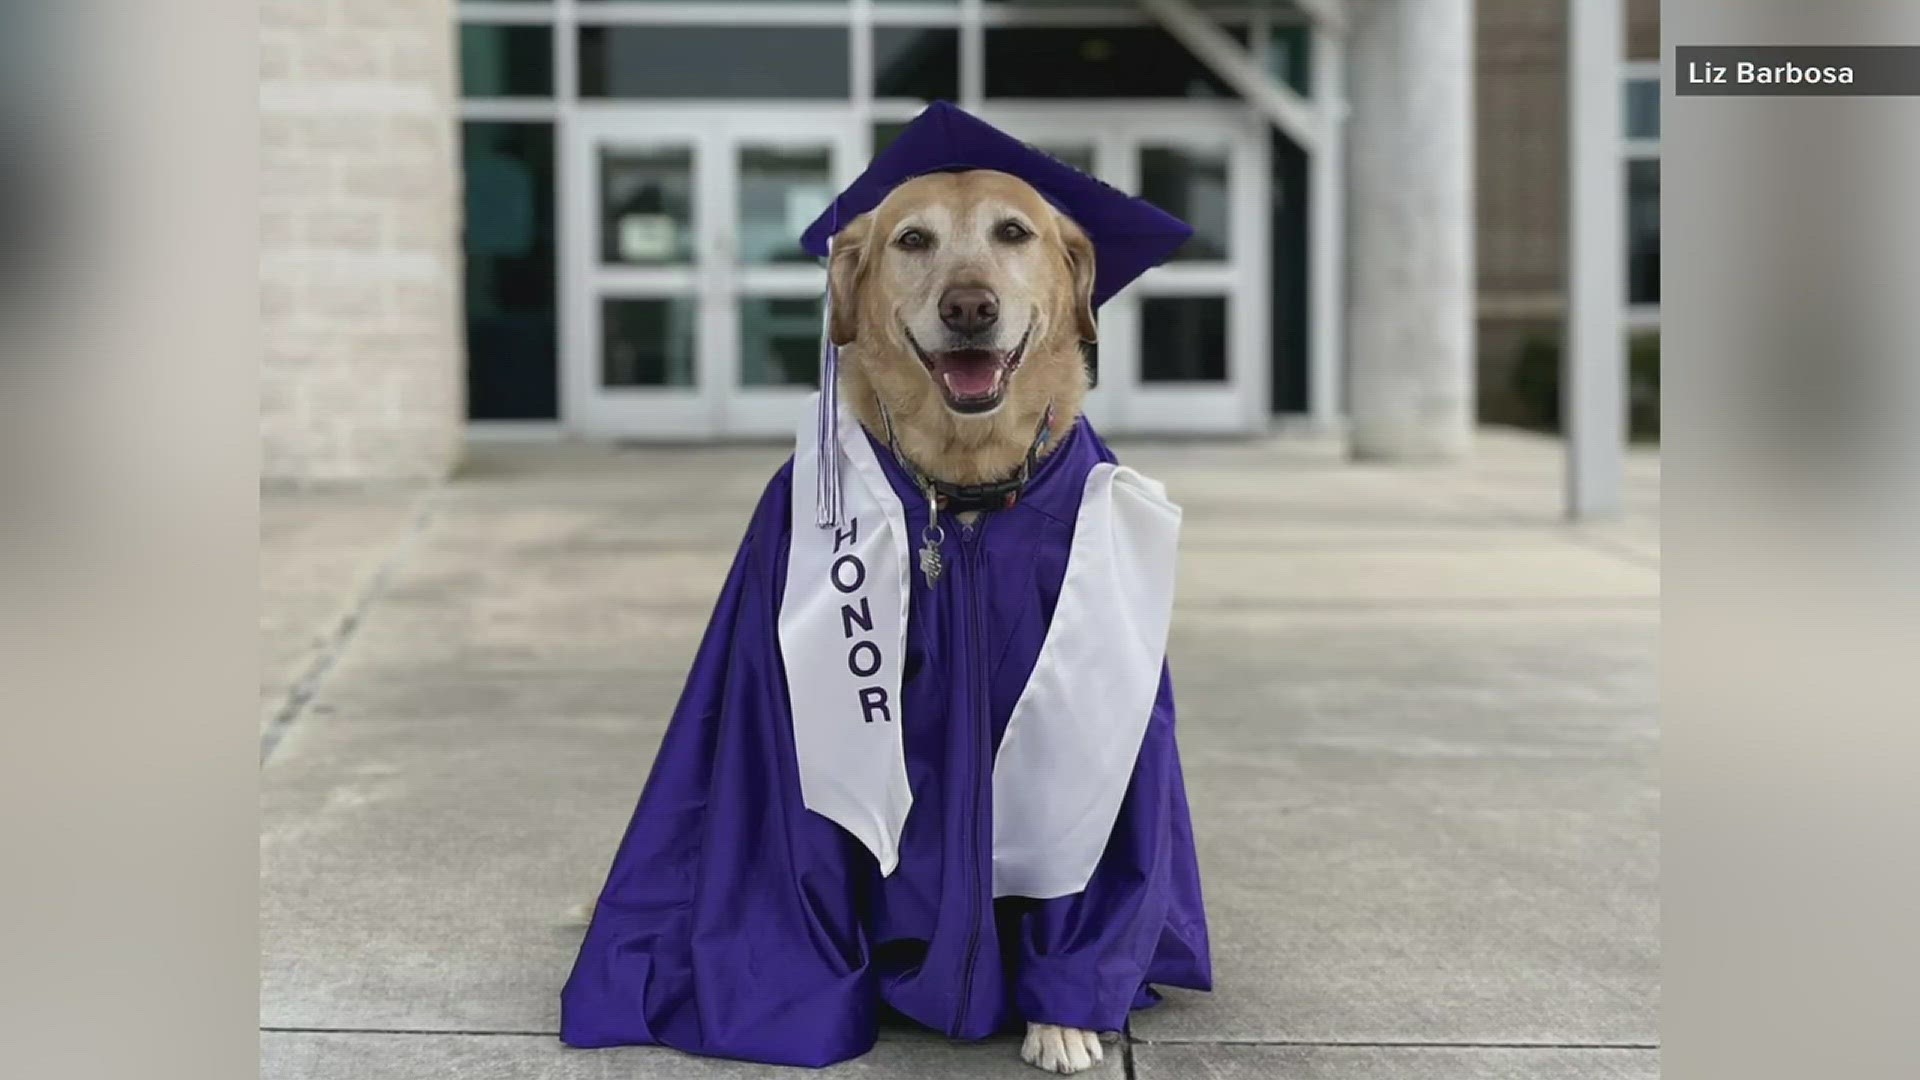 Sadie the service dog started going to school with Annslee Barbosa, who is a Type 1 diabetic, in the 3rd grade. Now, Annslee is going to high school without Sadie.